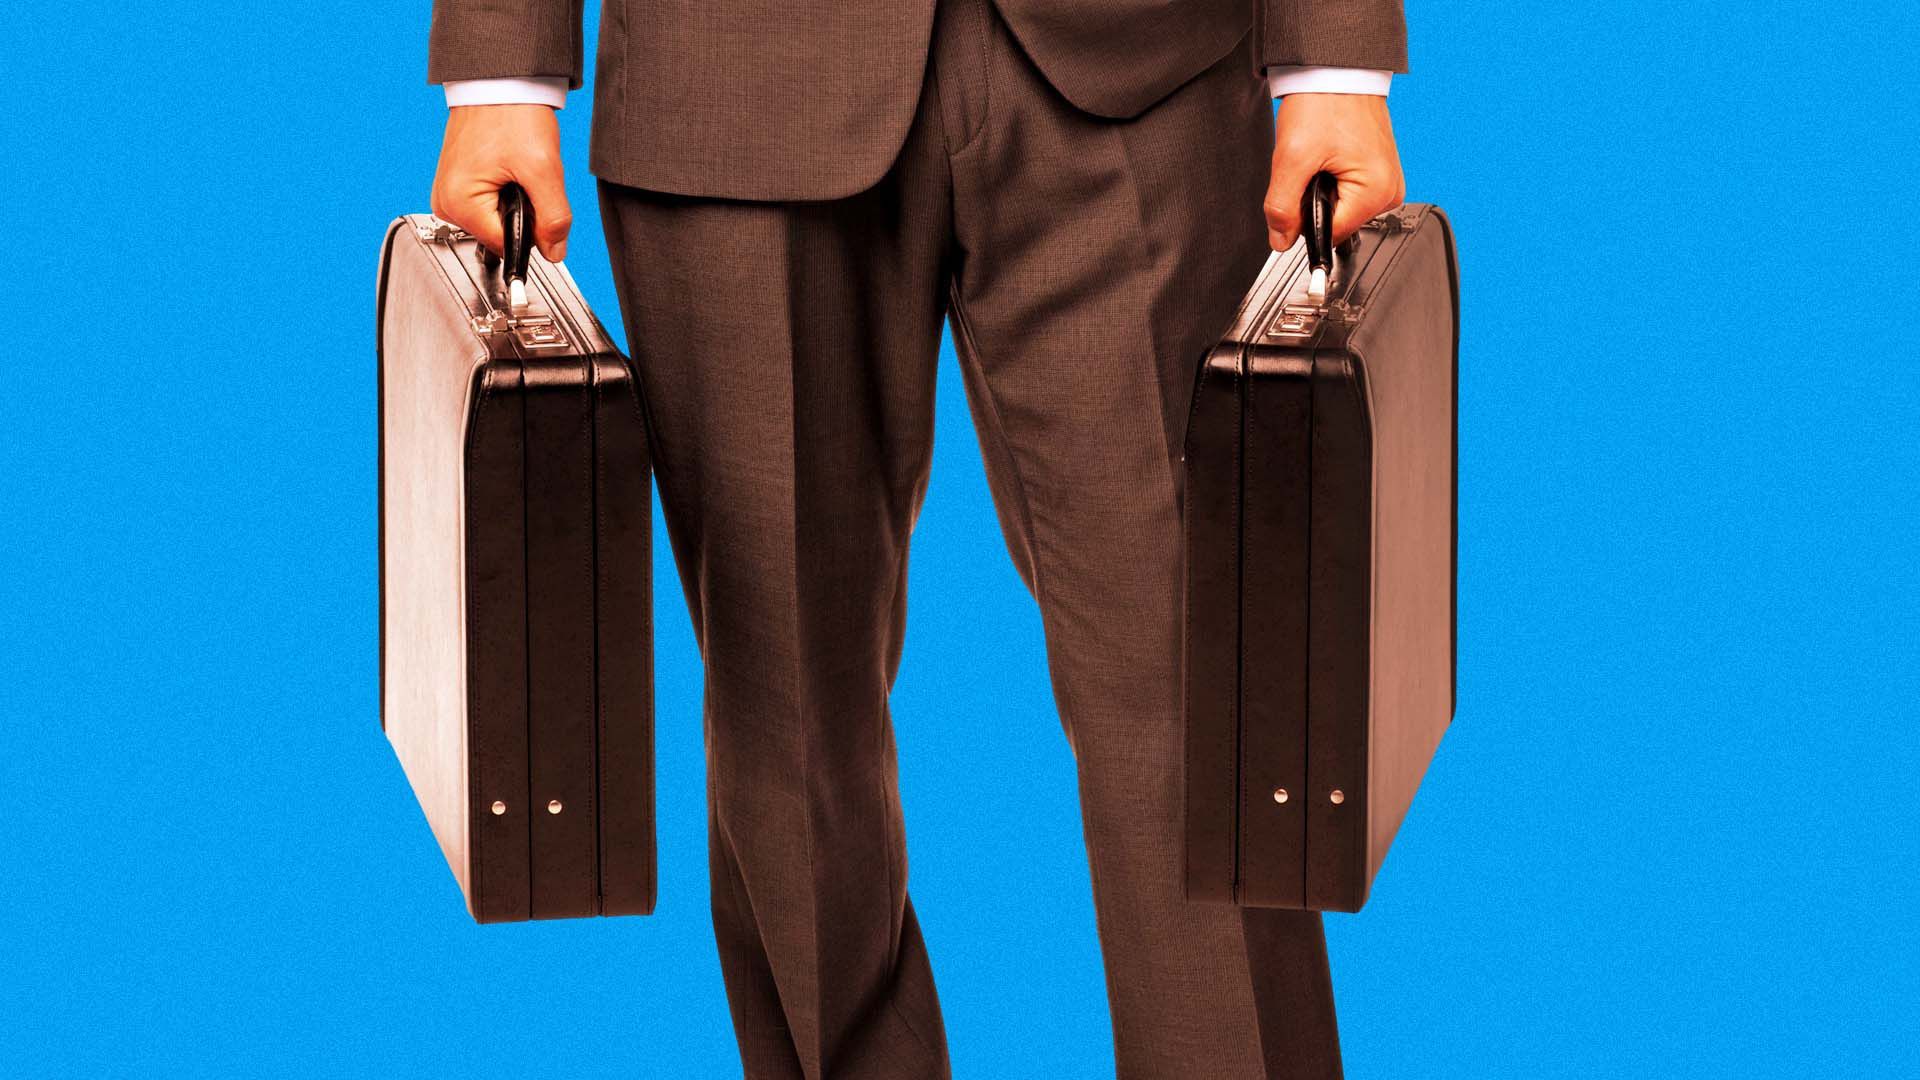 Illustration of a business man holding two briefcases